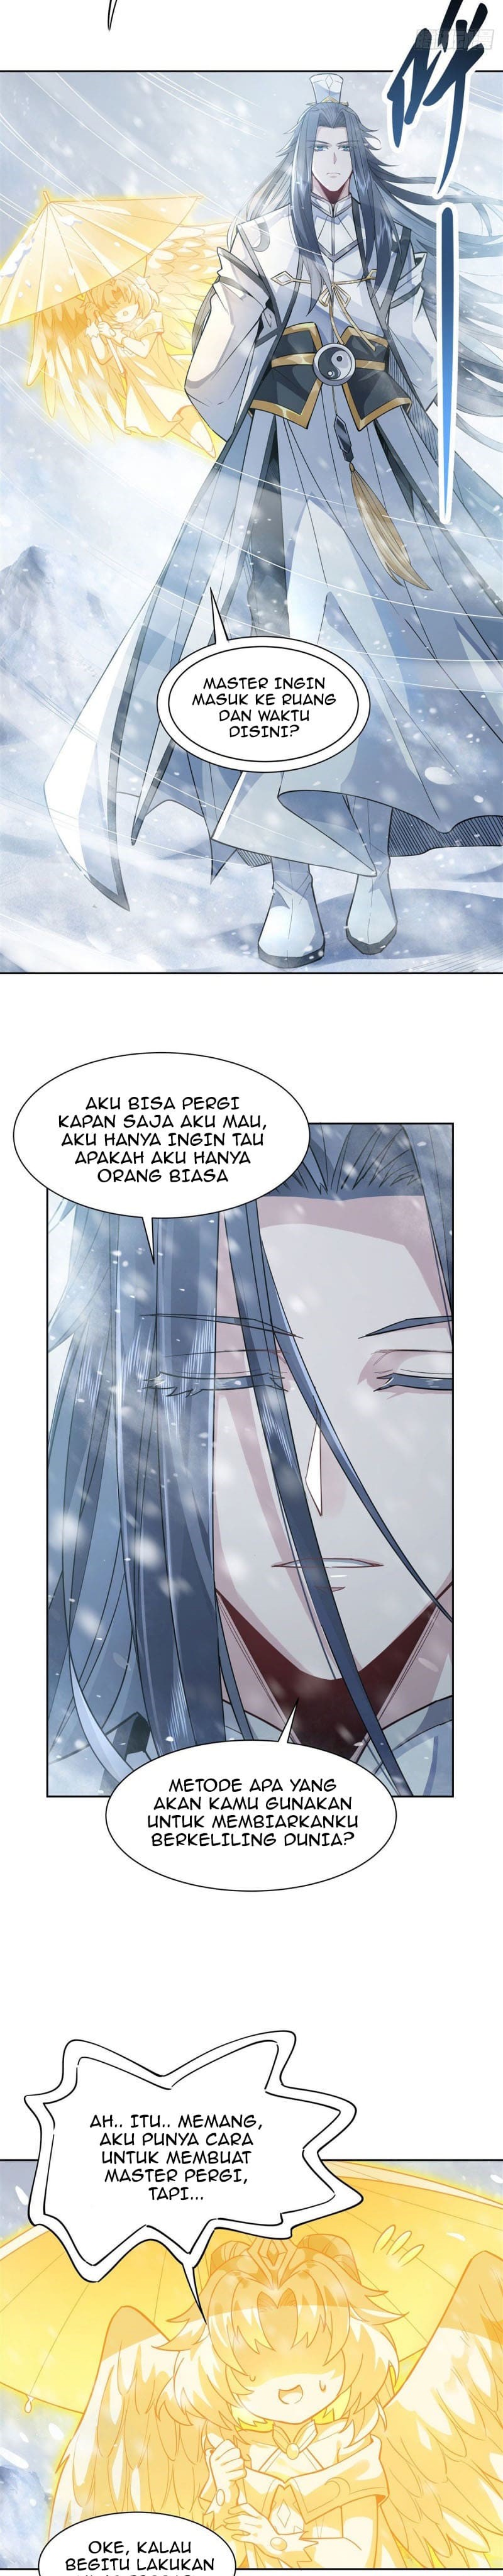 Dilarang COPAS - situs resmi www.mangacanblog.com - Komik my female apprentices are all big shots from the future 037 - chapter 37 38 Indonesia my female apprentices are all big shots from the future 037 - chapter 37 Terbaru 8|Baca Manga Komik Indonesia|Mangacan